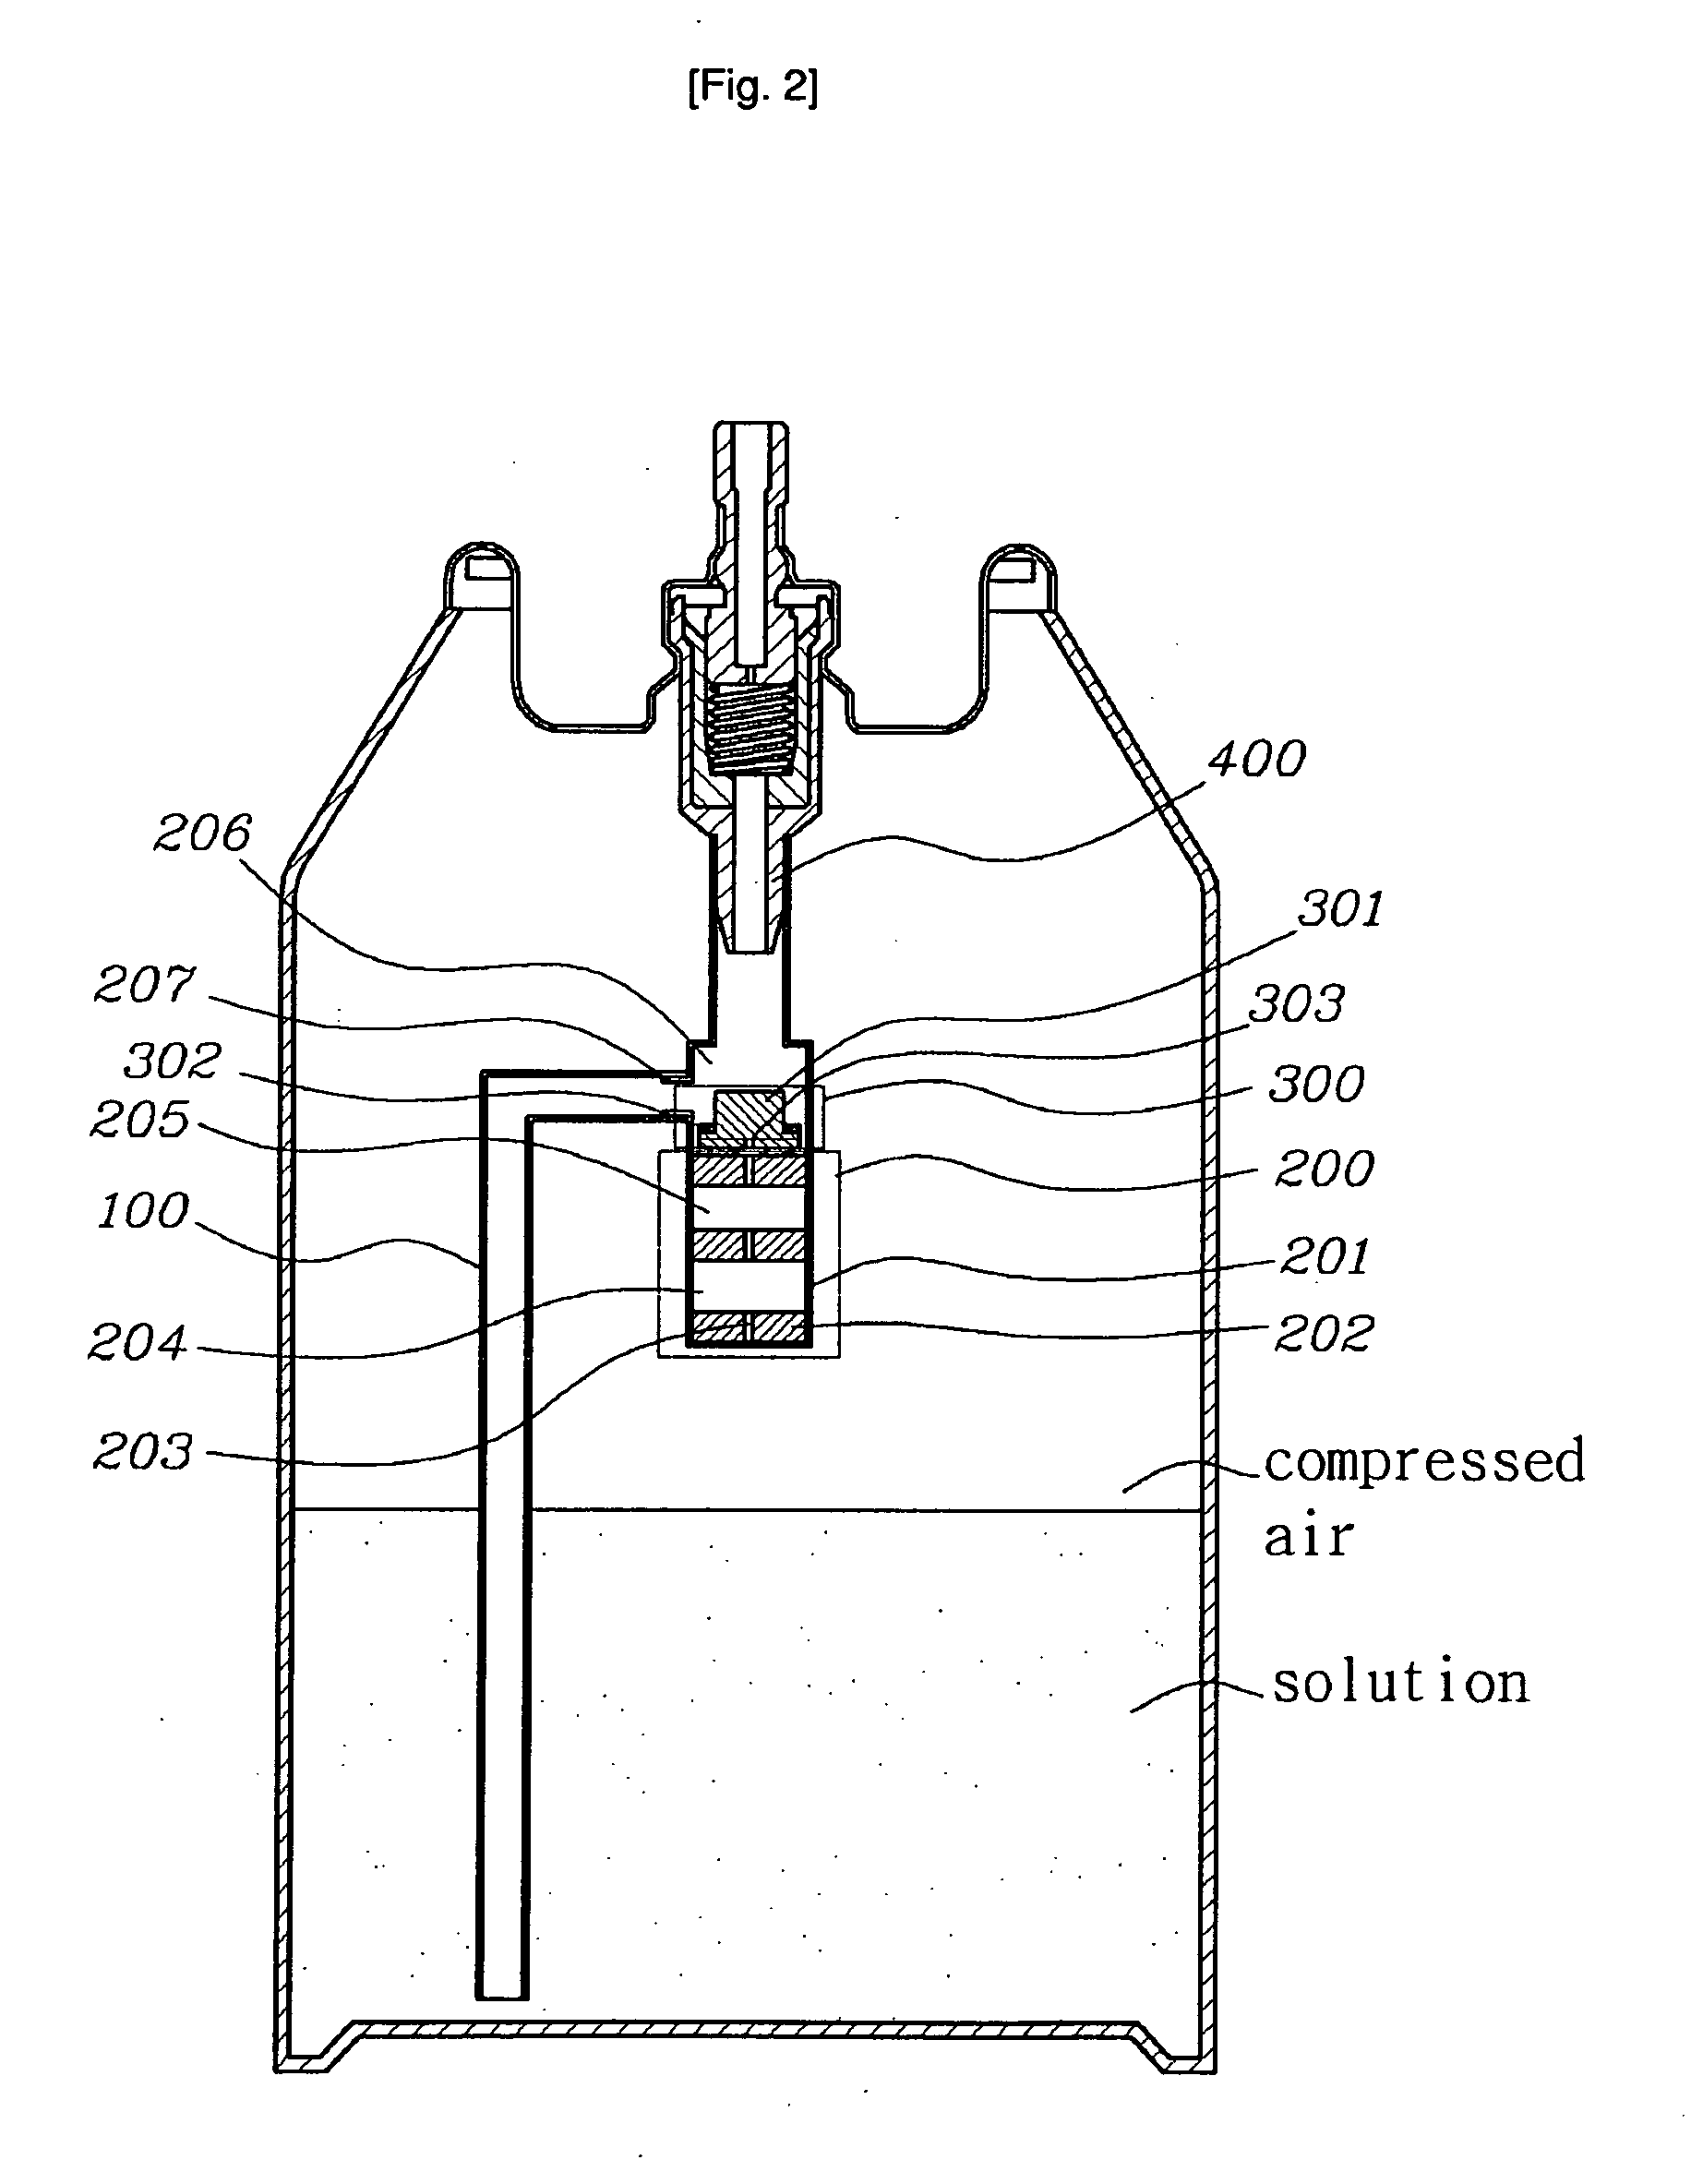 Straw Assembly for Compressed Air